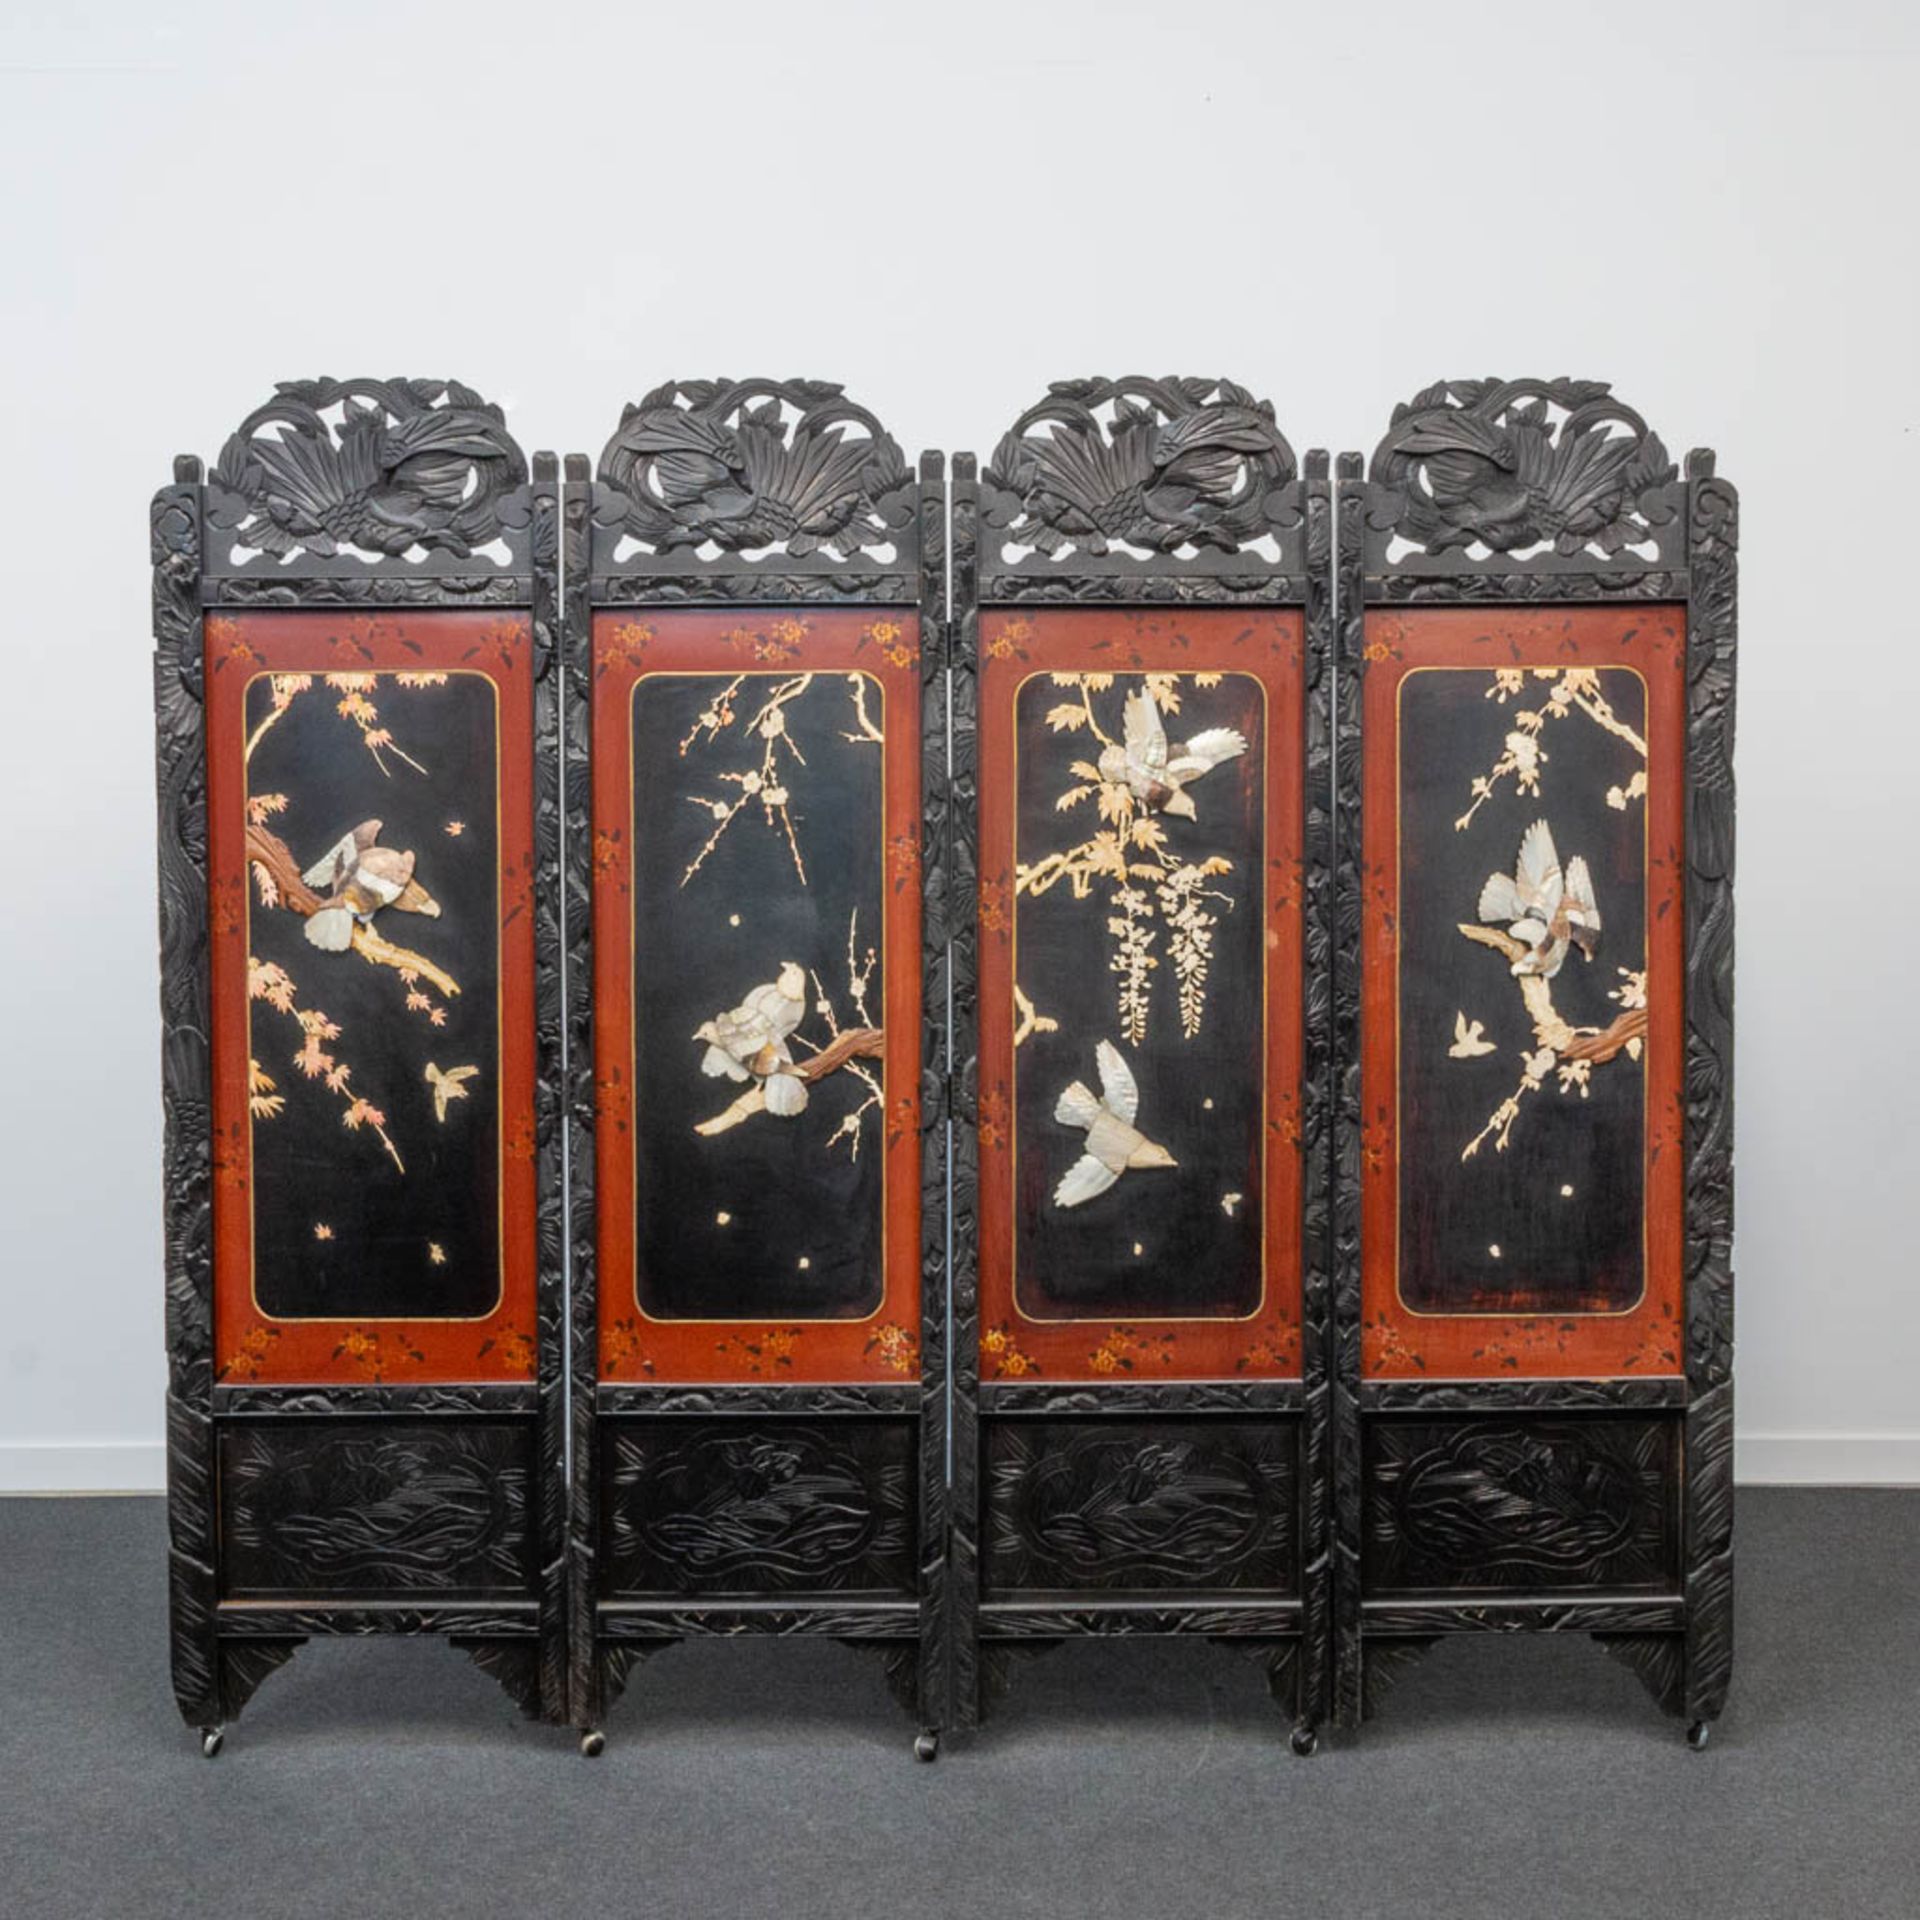 A Chinese hardwood folding screen / Room divider with stone birds decorations - Image 2 of 19